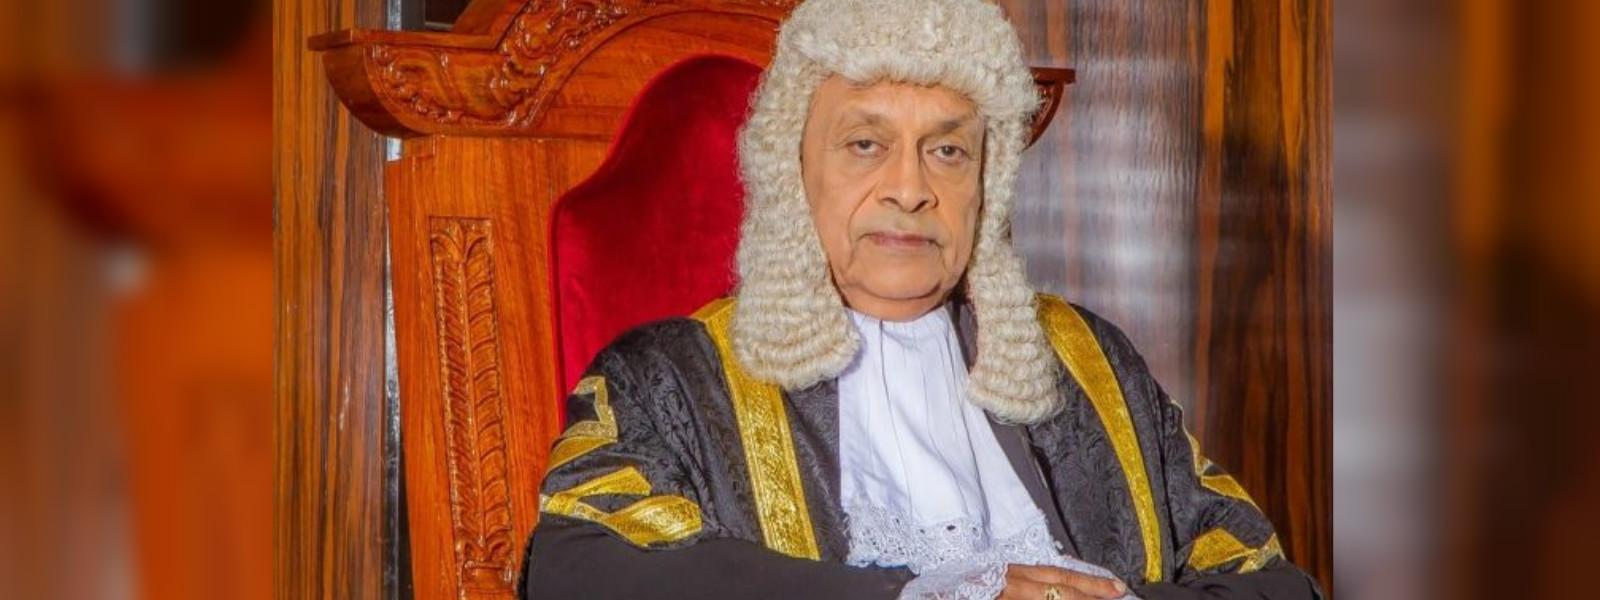 Speaker accepts govt prior to the 26th of October